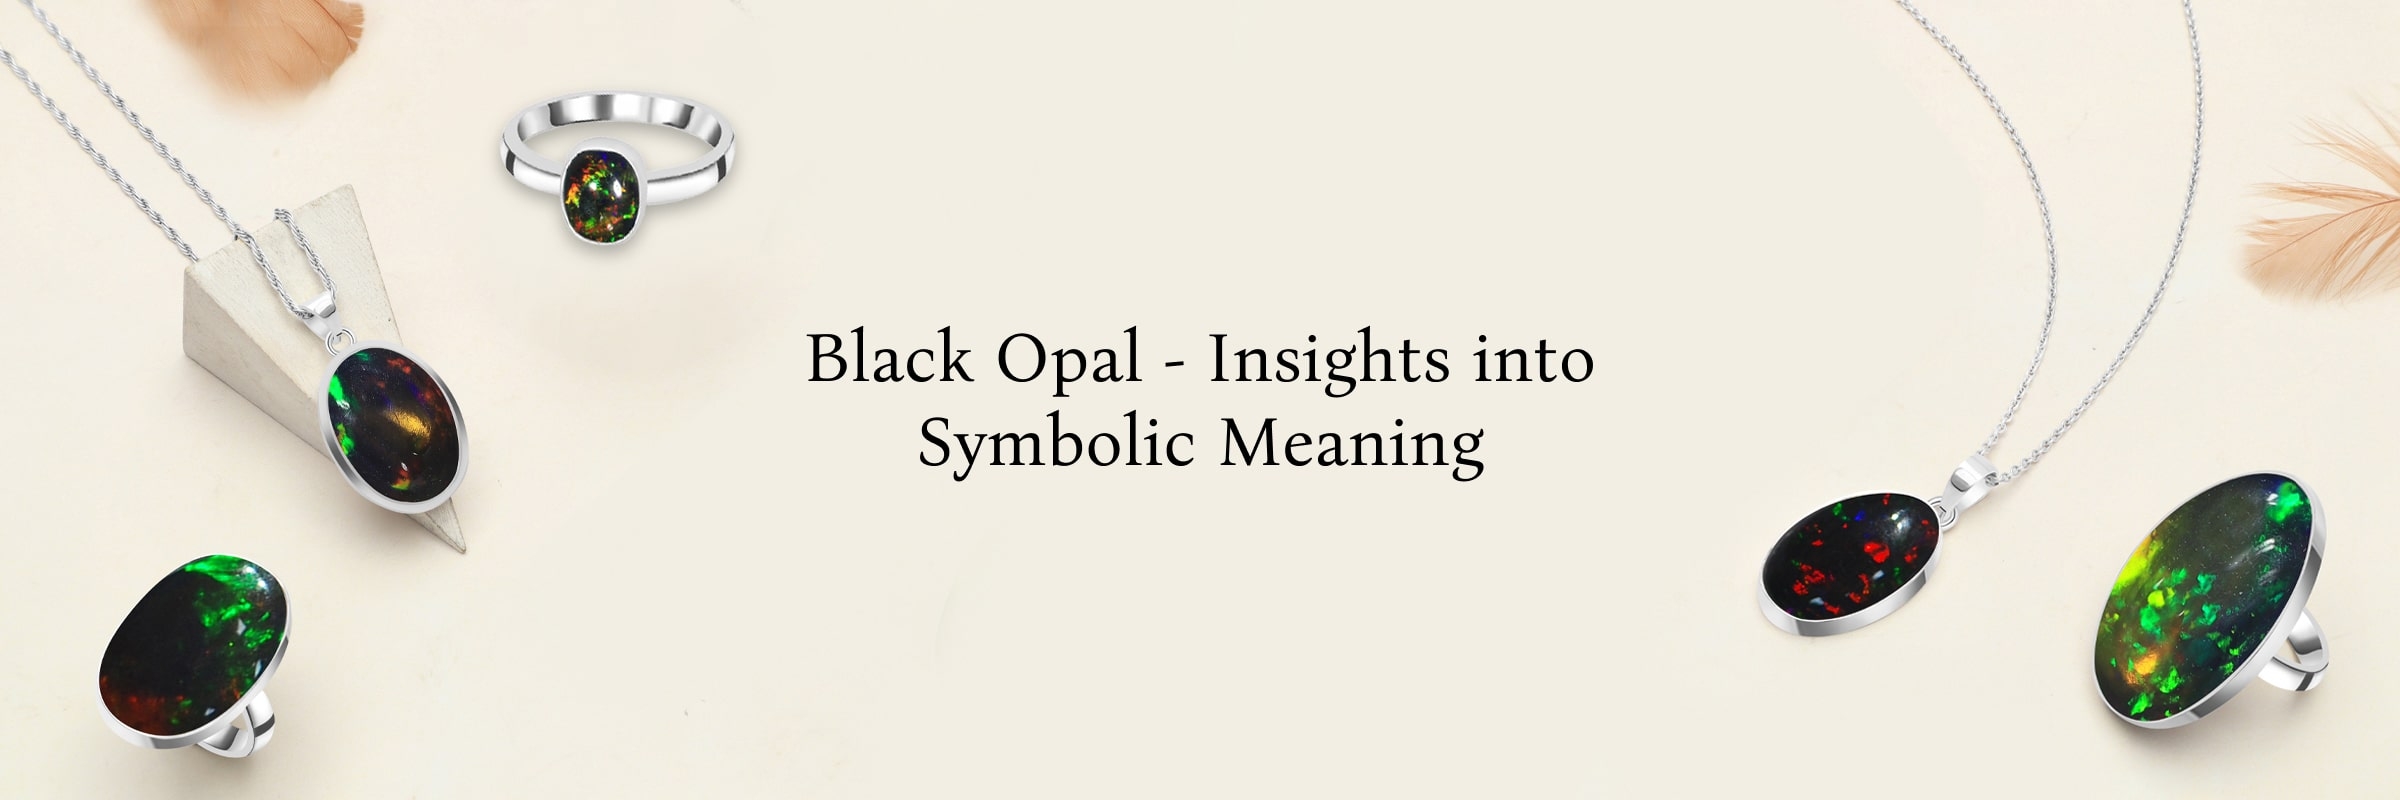 Black Opal Meaning and Symbolism 